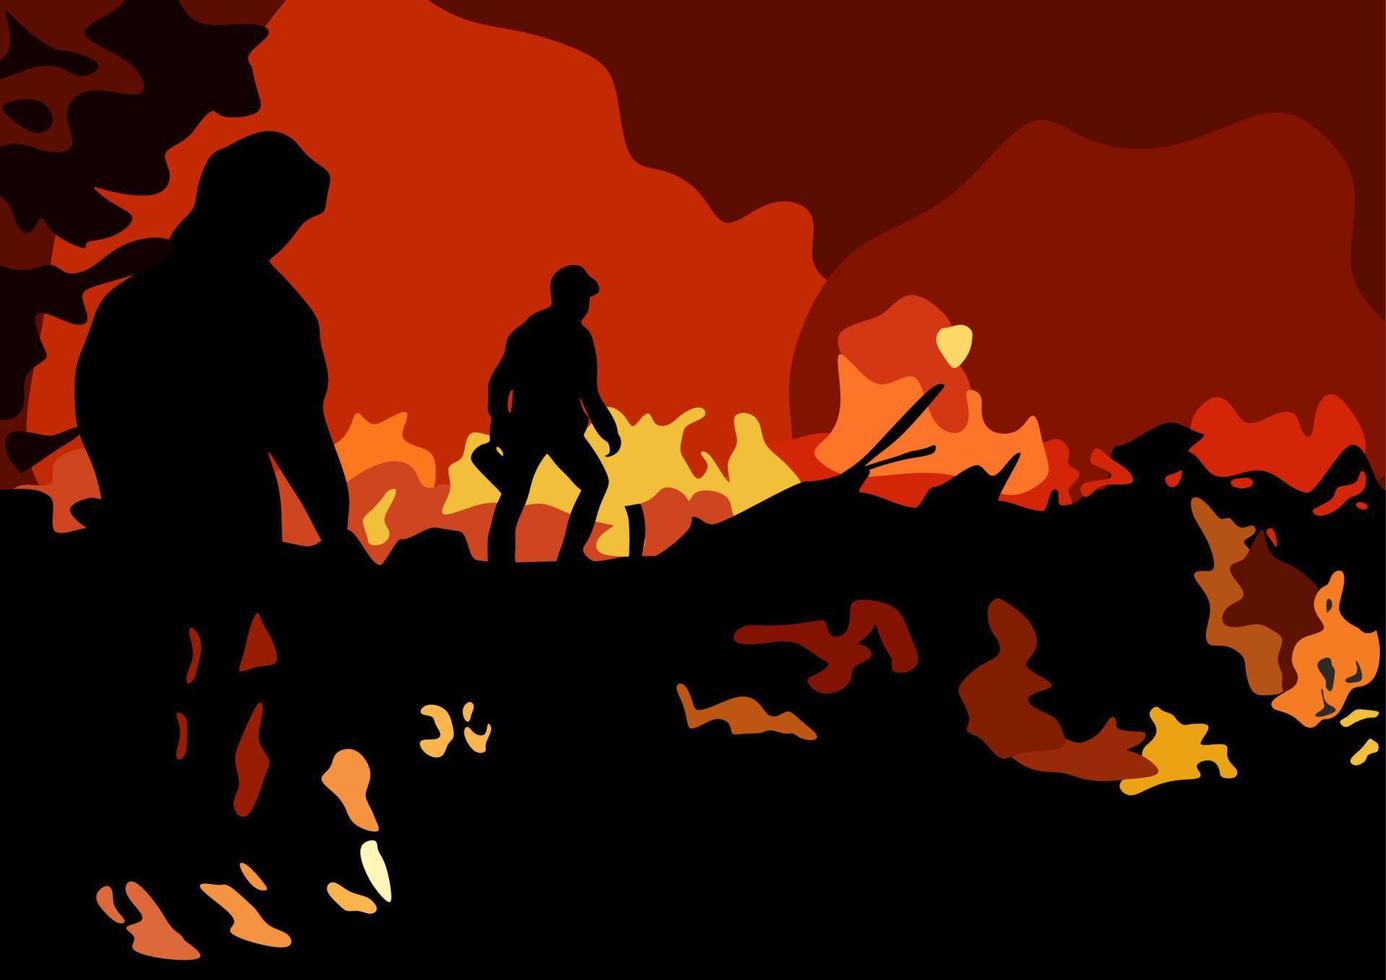 Fireman's fight with fire in forest, man extinguish burning wildfire at night wood with raging flames. wild nature catastrophe. Landscape. vector